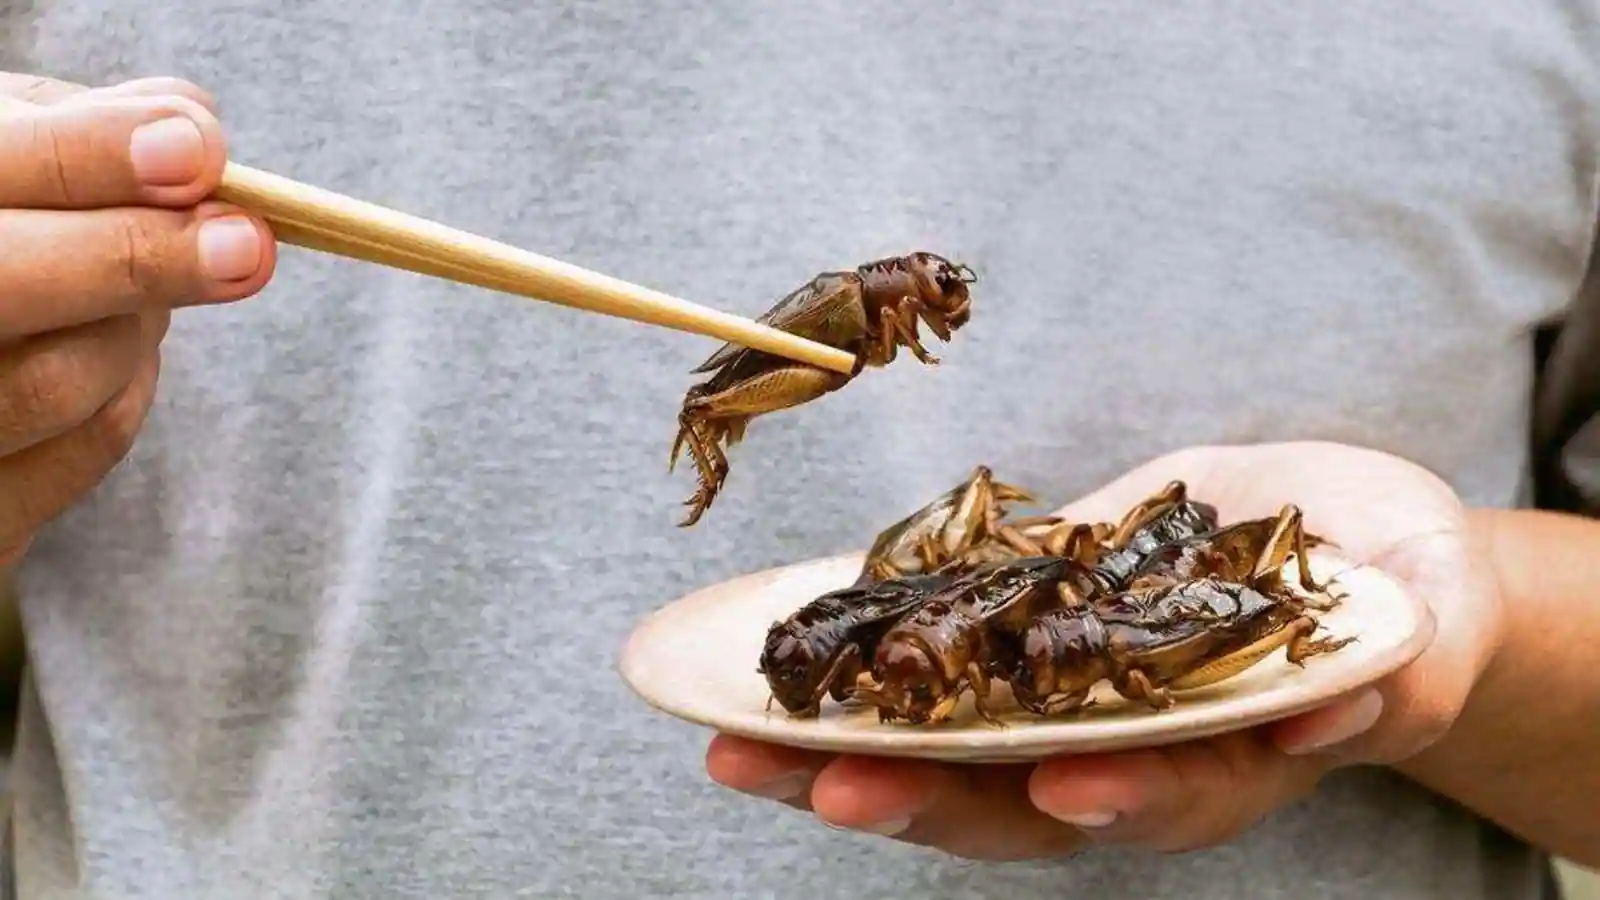 Eating insects